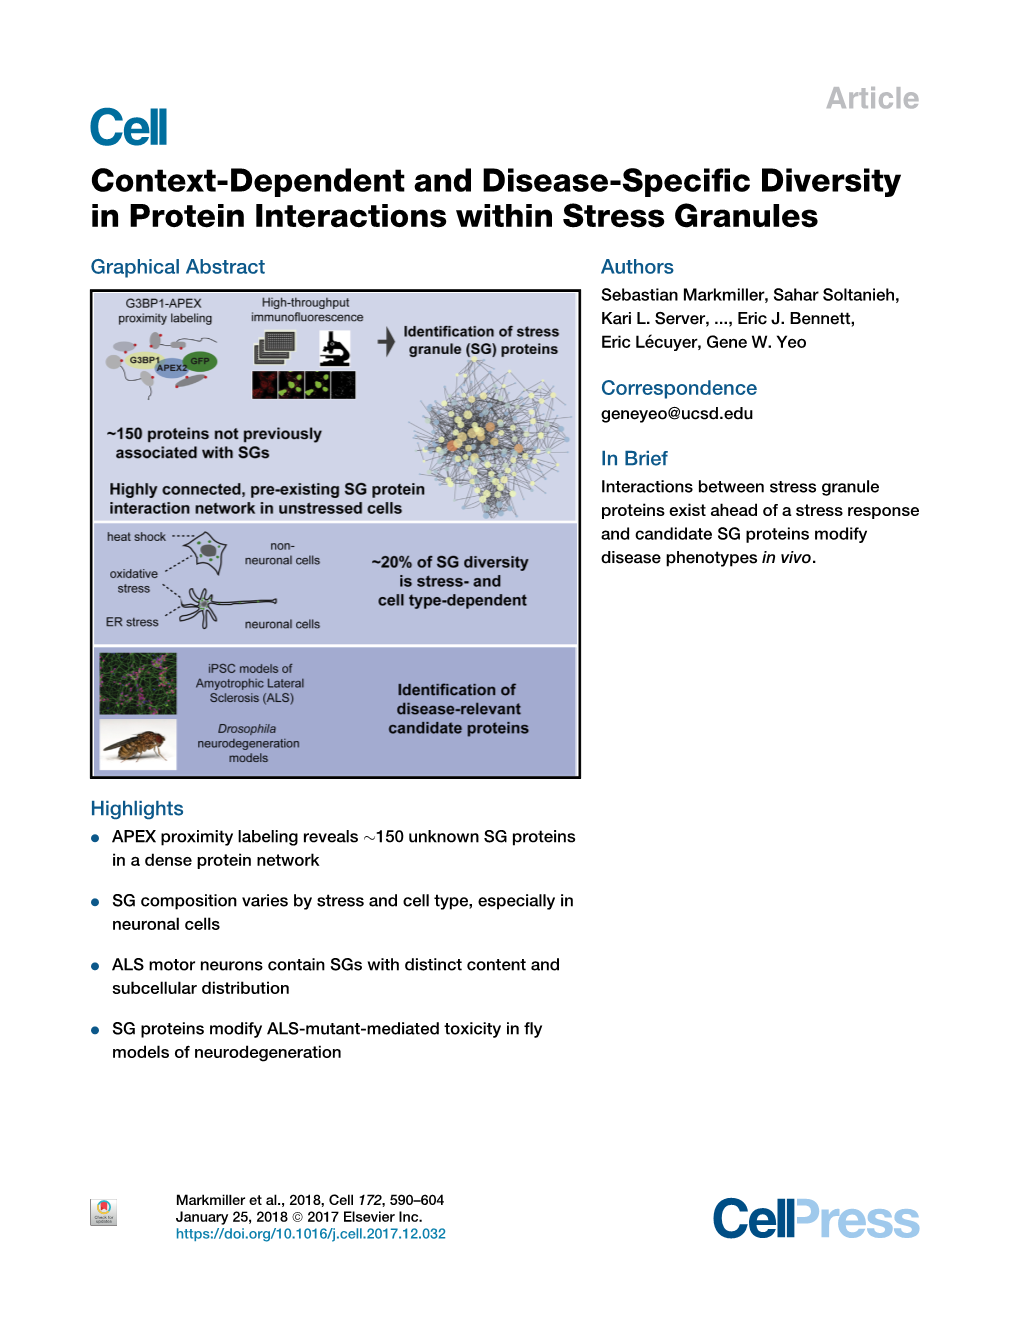 Context-Dependent and Disease-Specific Diversity In